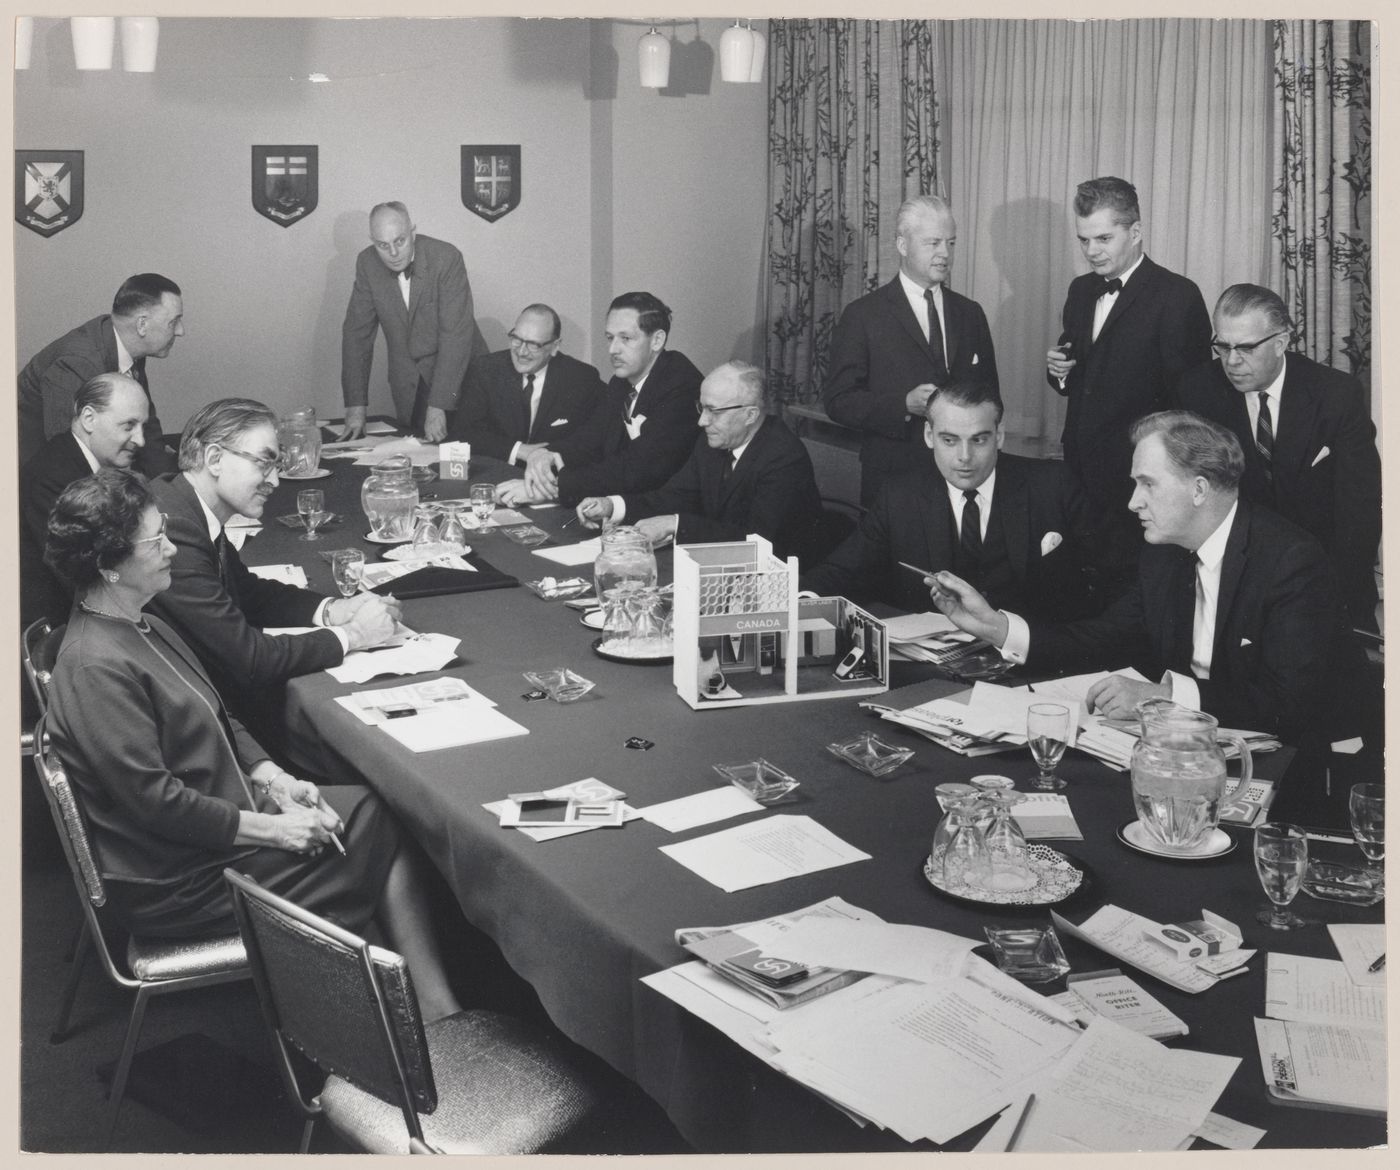 Parkin and other members at initial meeting of the First National Design Council at Park Plaza Hotel in Toronto